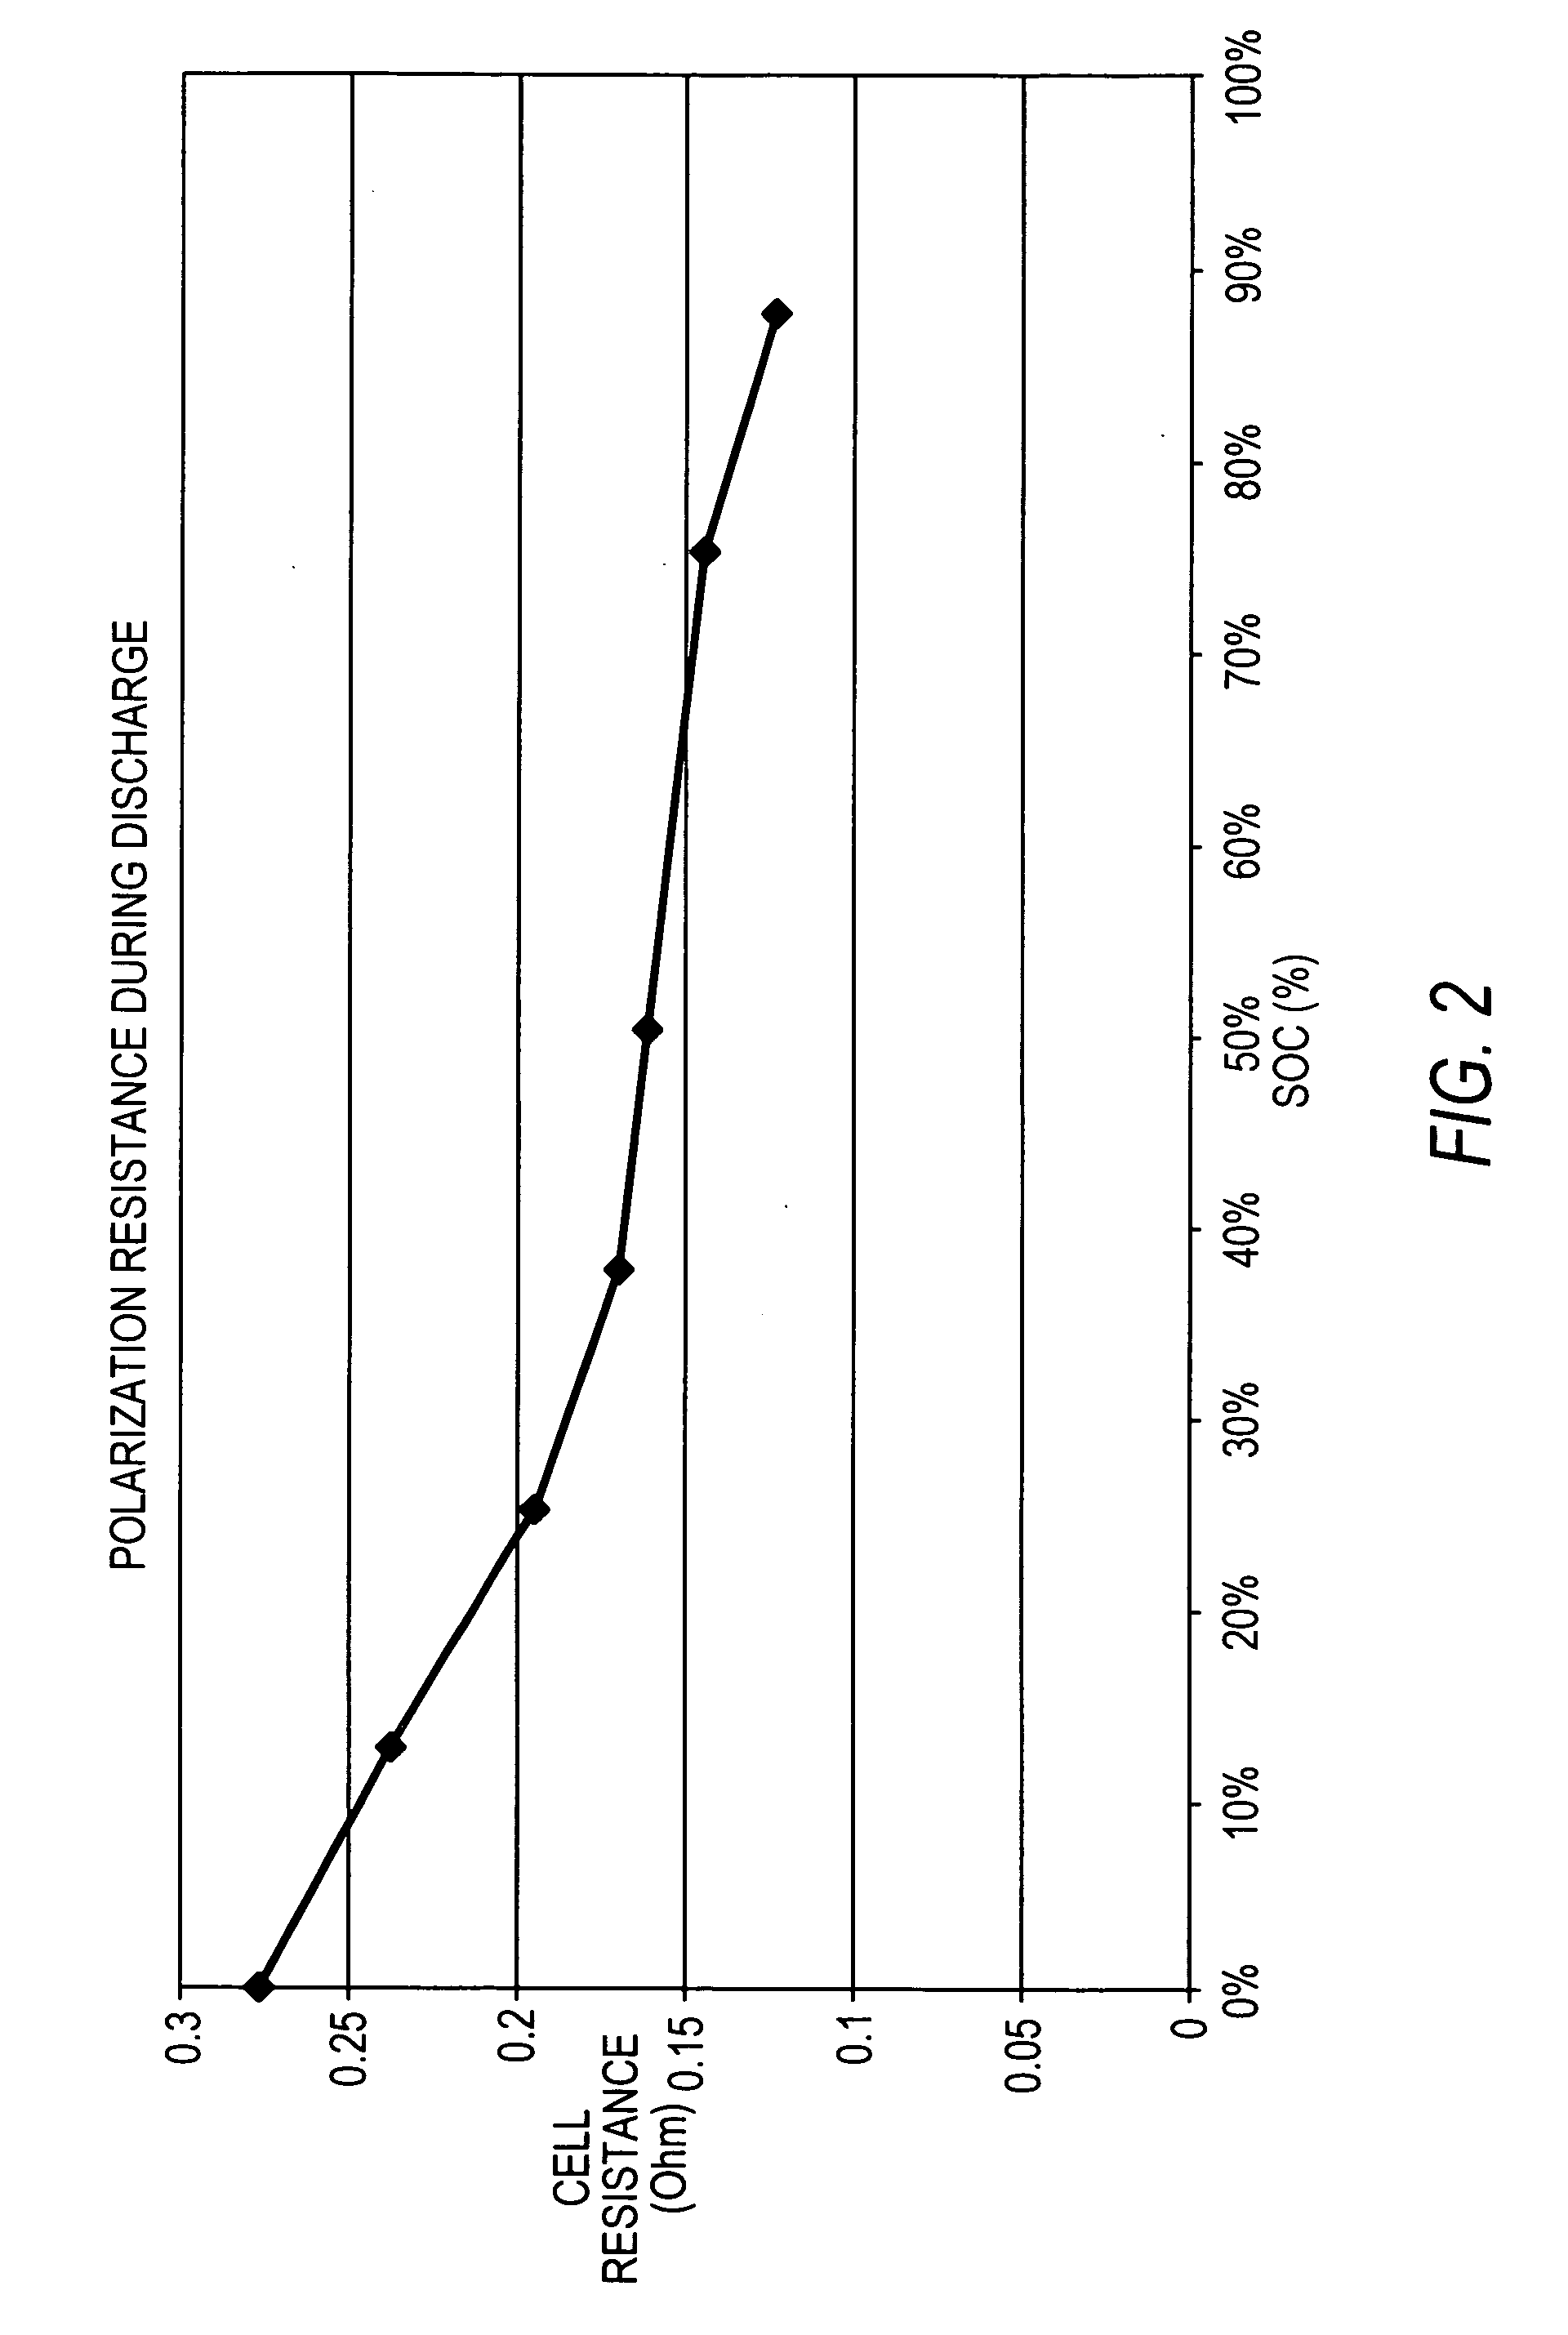 Lithium sulfur rechargeable battery fuel gauge systems and methods